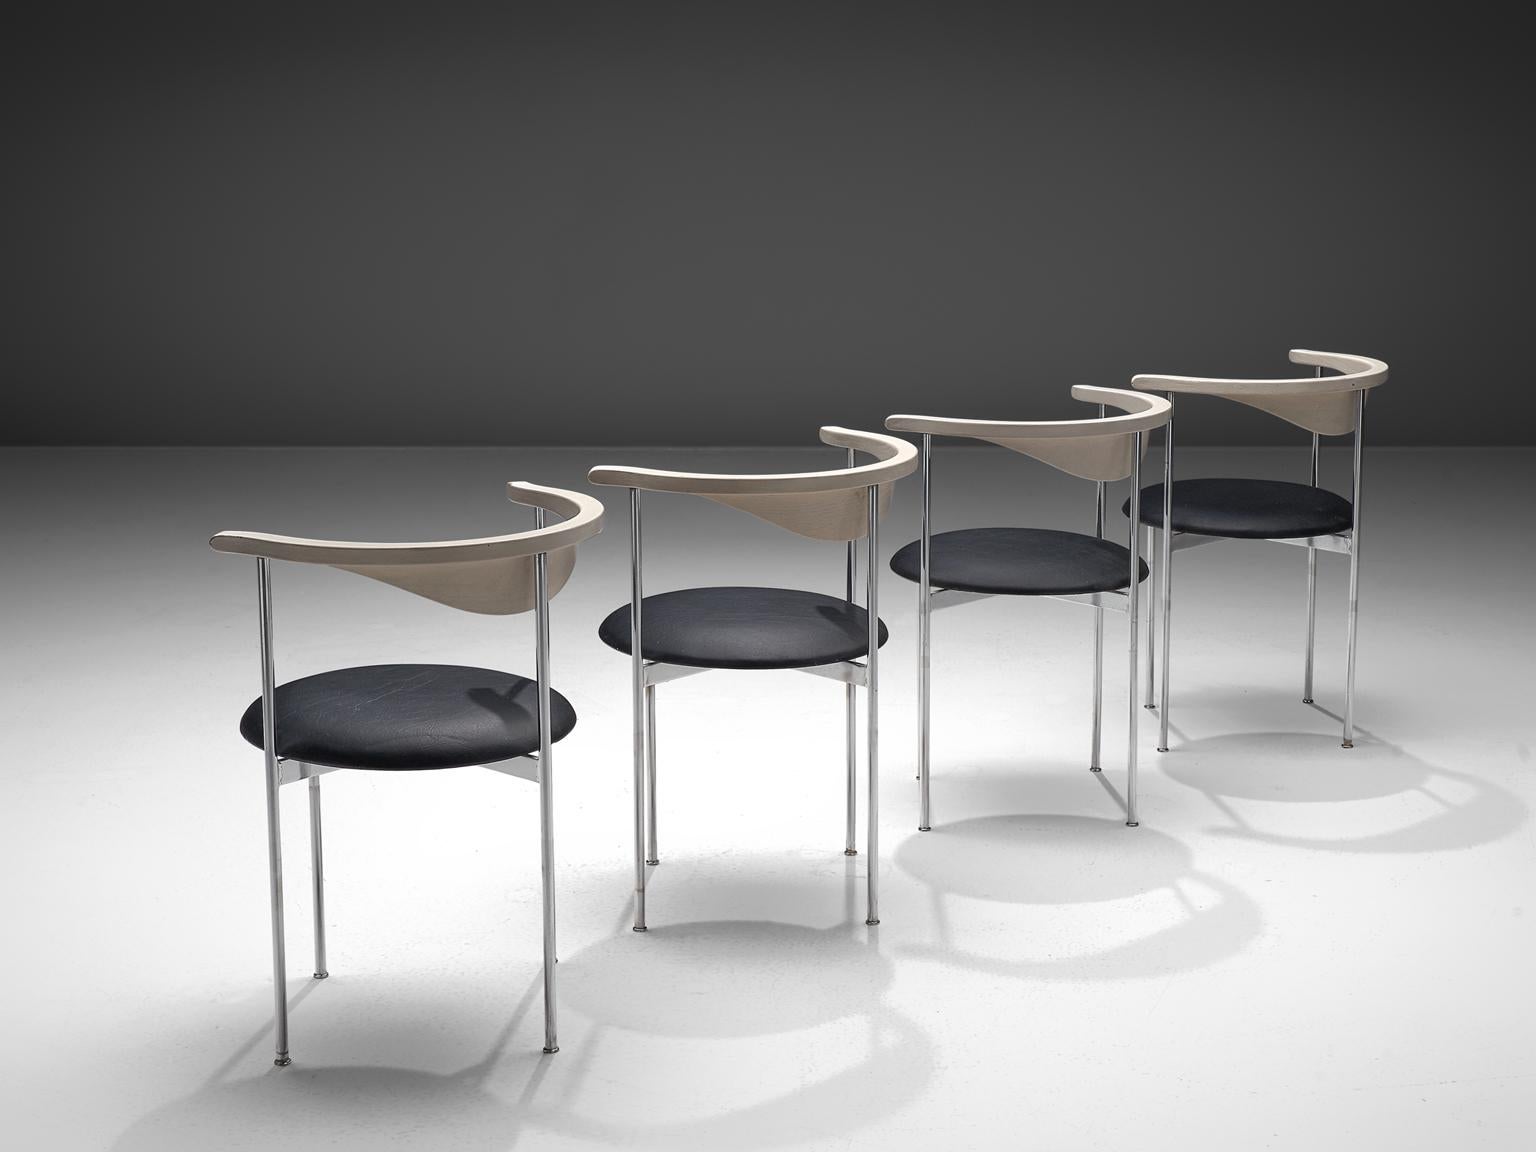 Frederik Sieck, four chairs, black skai, metal, white wood, Denmark, design 1962, execution 1967.

These industrial clear set of the model 3200 chairs were designed by the Swedish Frederik Sieck for Fritz Hansen. The round chair has a classic